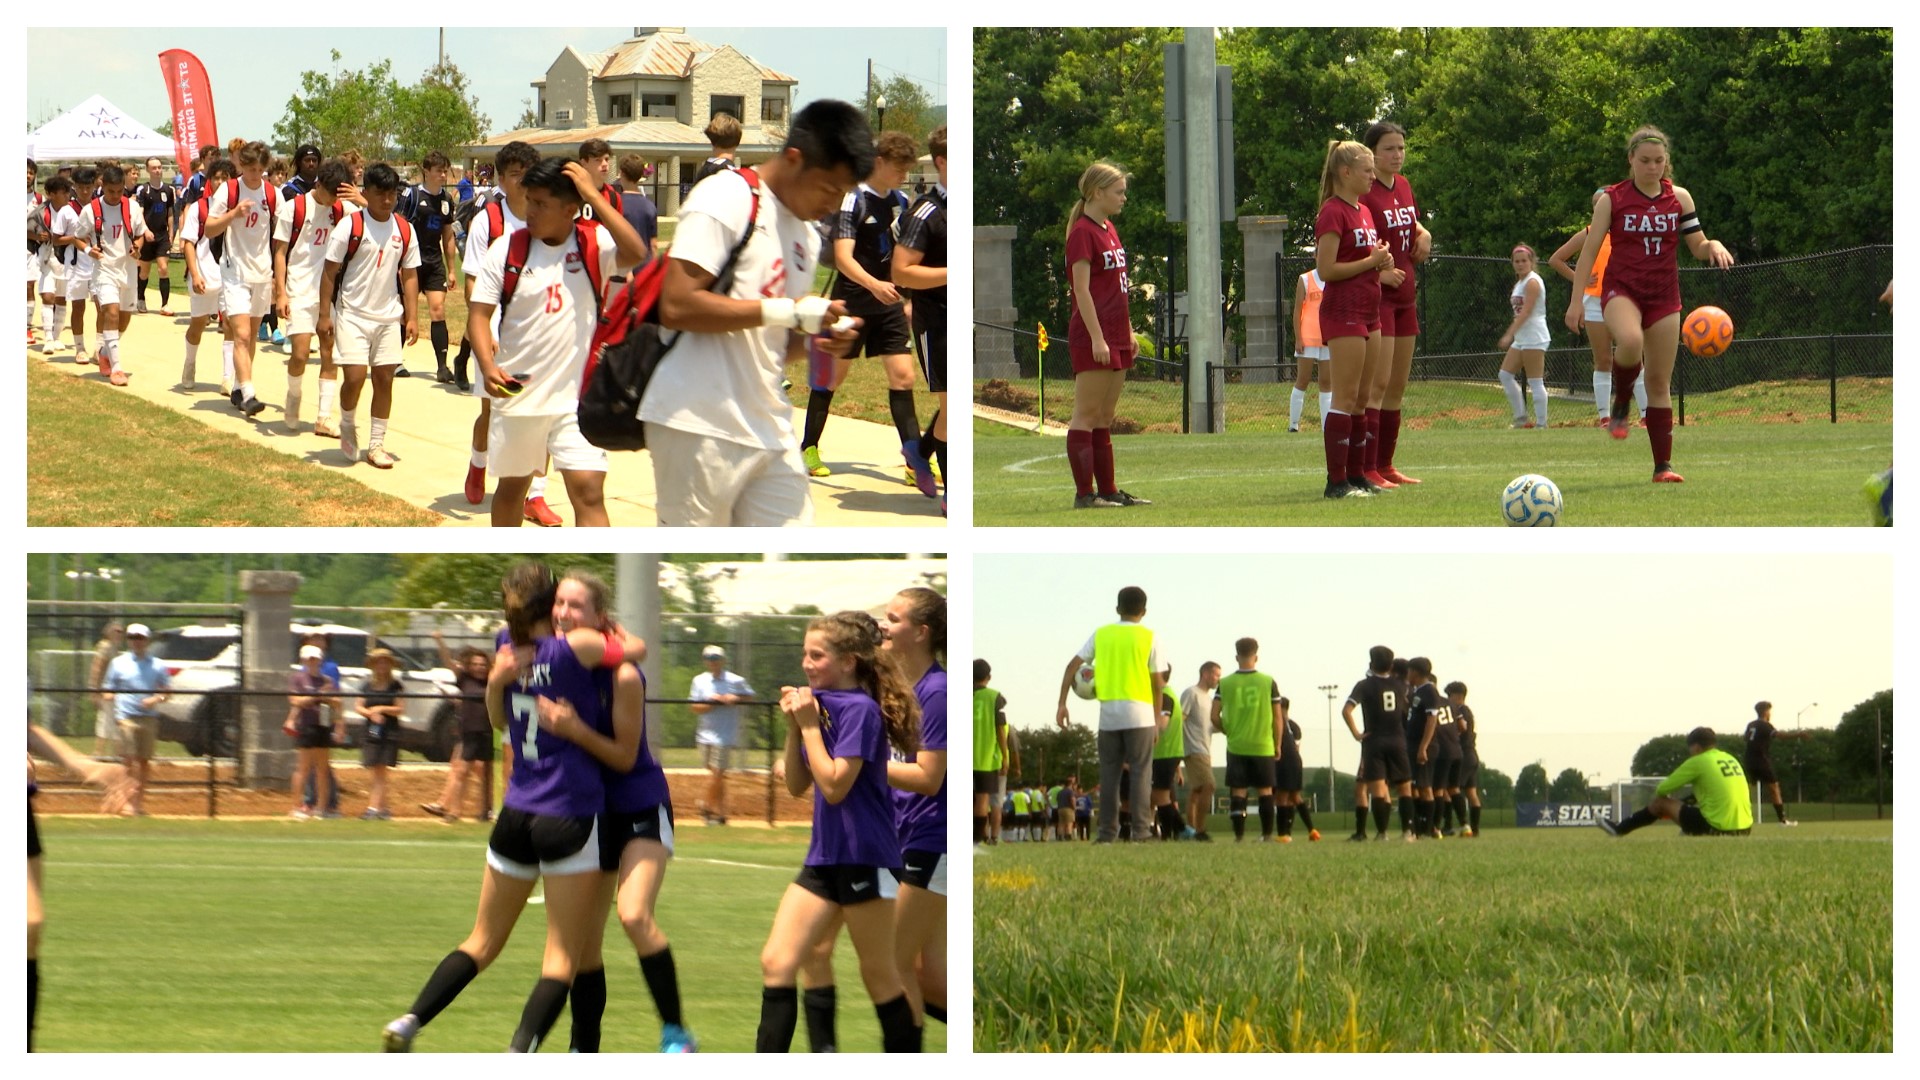 High School soccer teams from across Alabama are in Huntsville this week competing for state championships